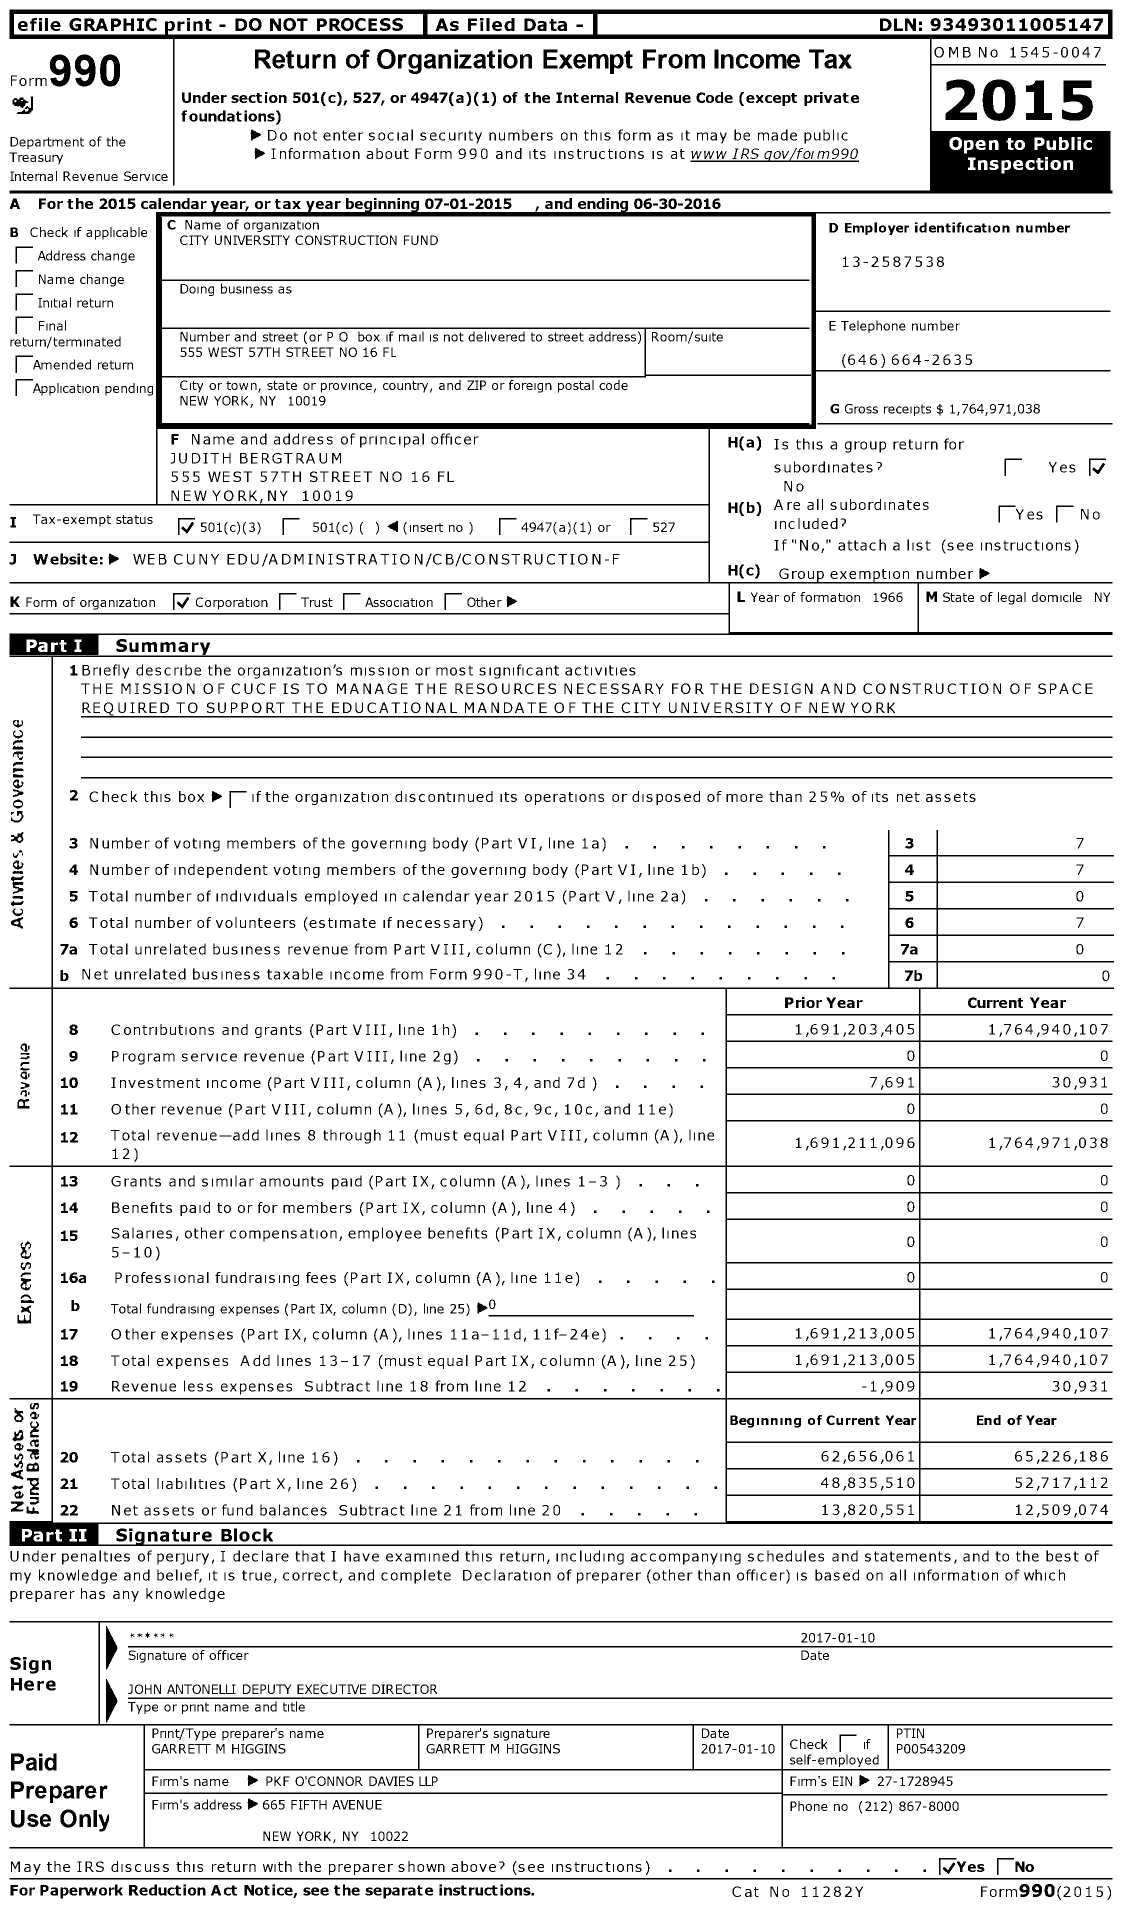 Image of first page of 2015 Form 990 for City University Construction Fund (CUCF)